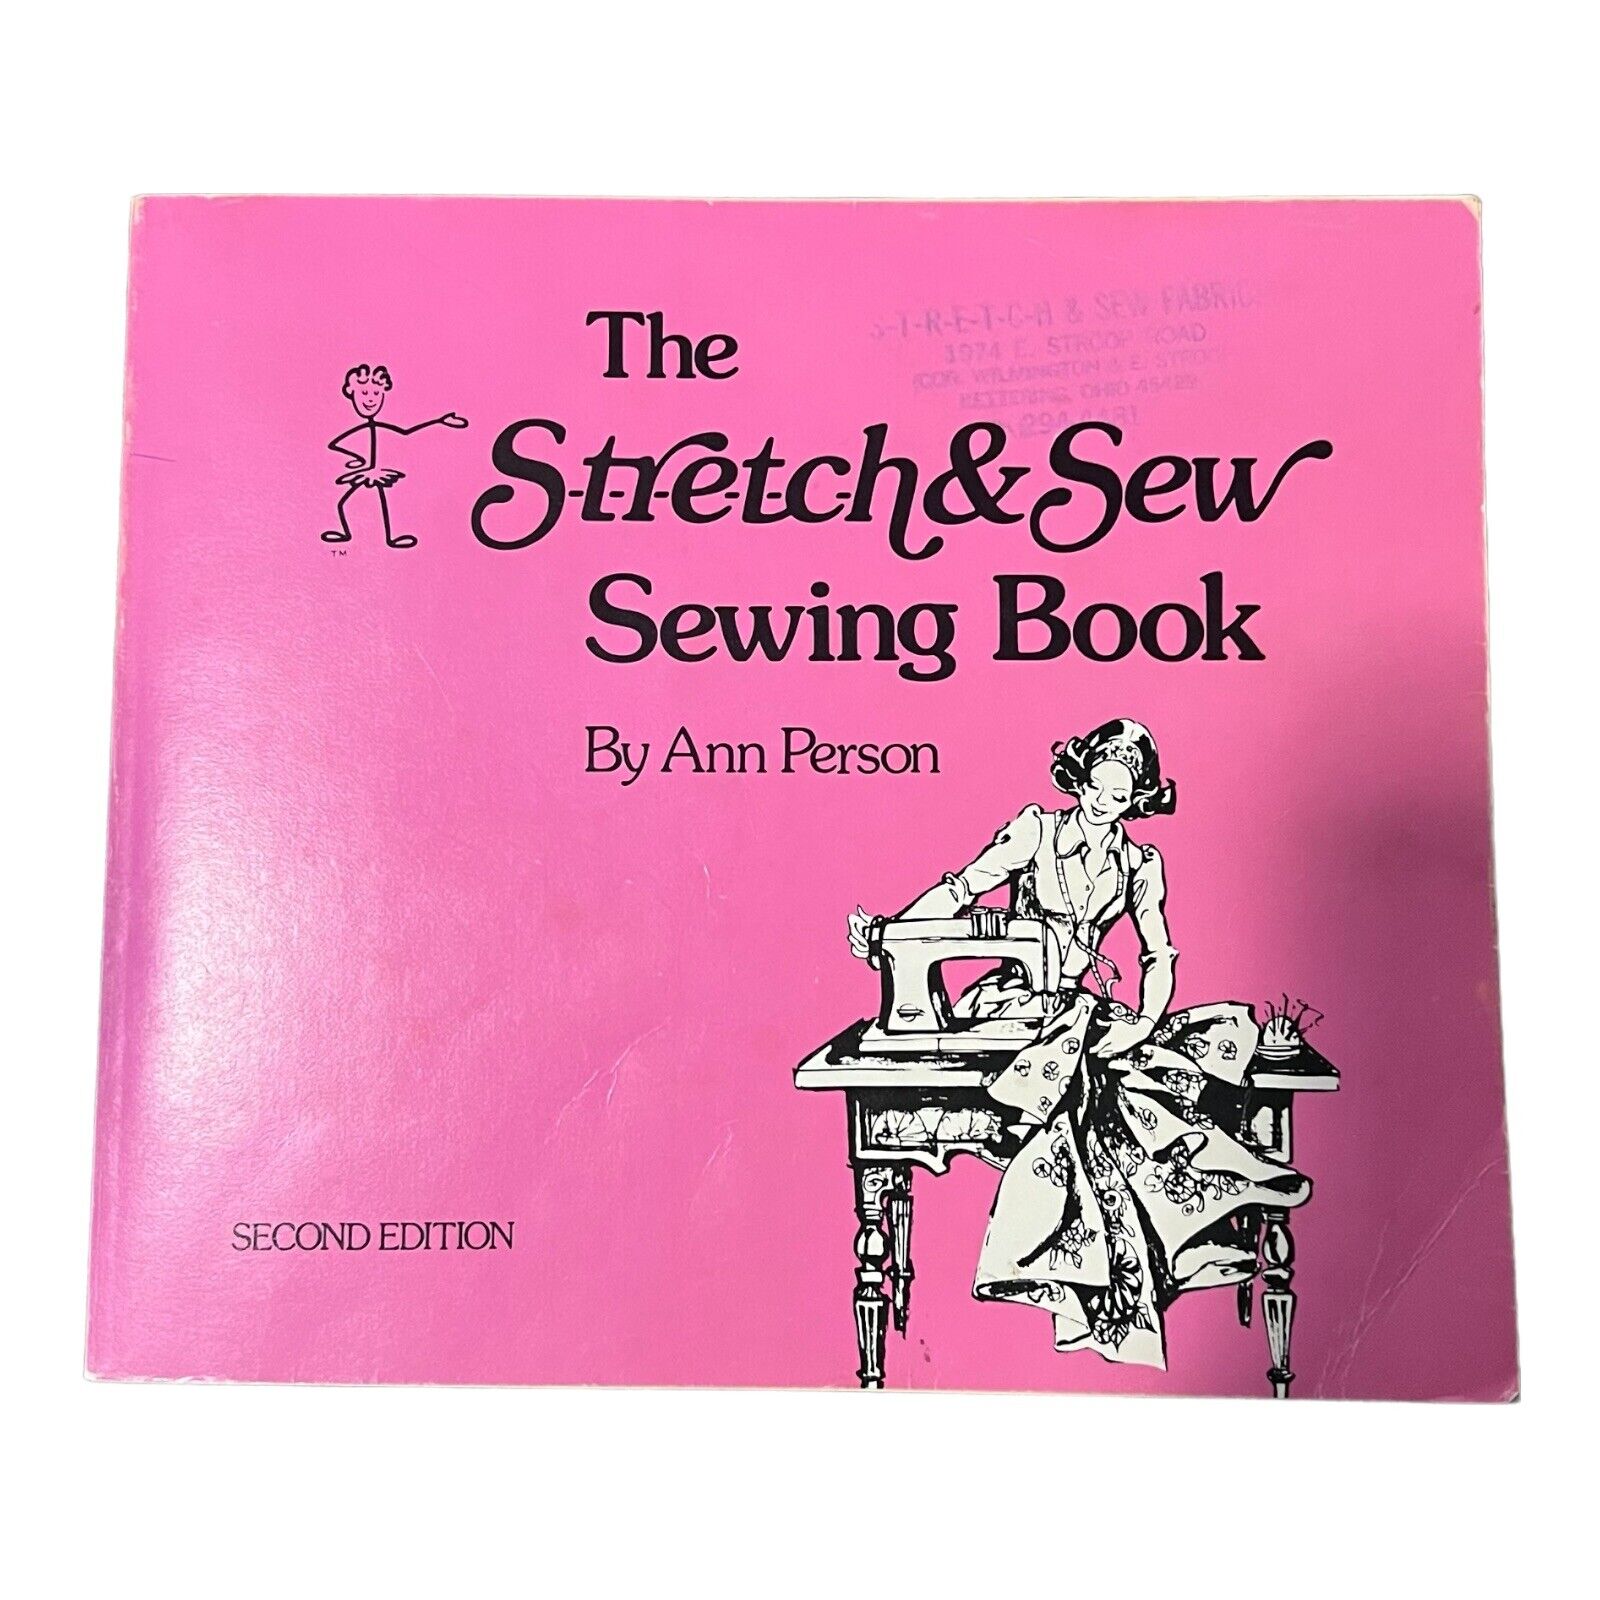 The Stretch & Sew Sewing Book by Ann Person  Second Edition